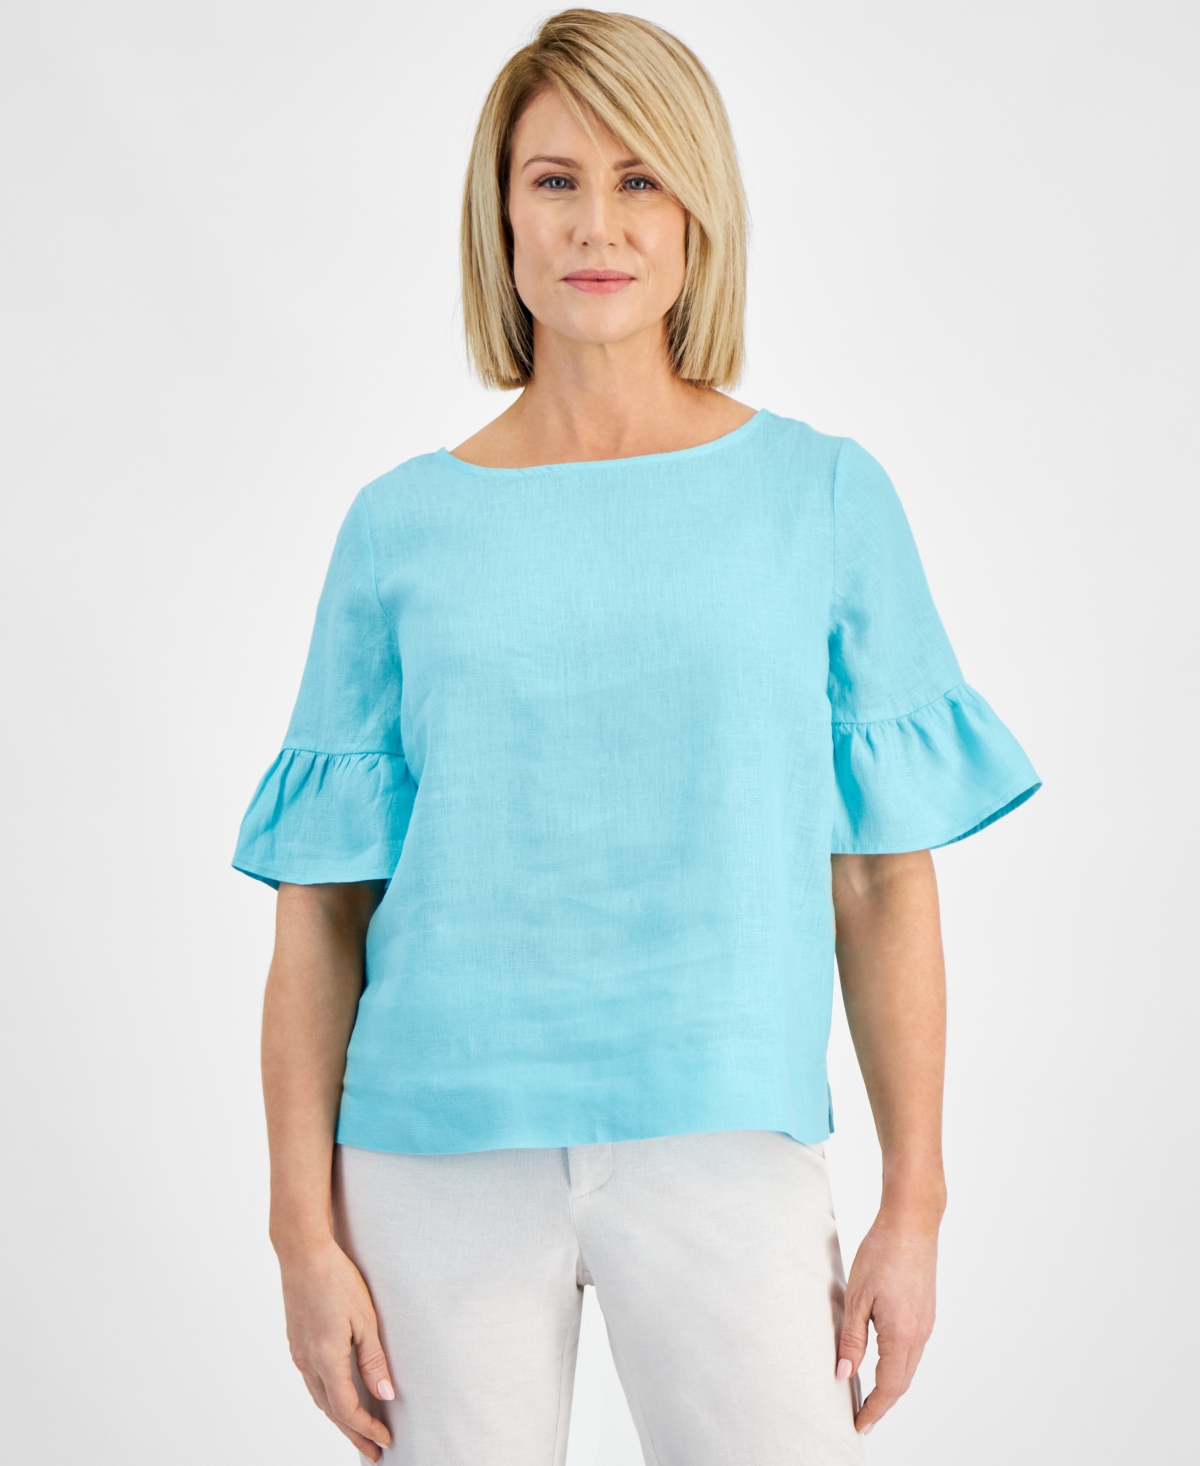 Petite Boat Neck Bell-Sleeve Linen Top, Created for Macy's - Light Pool Blue